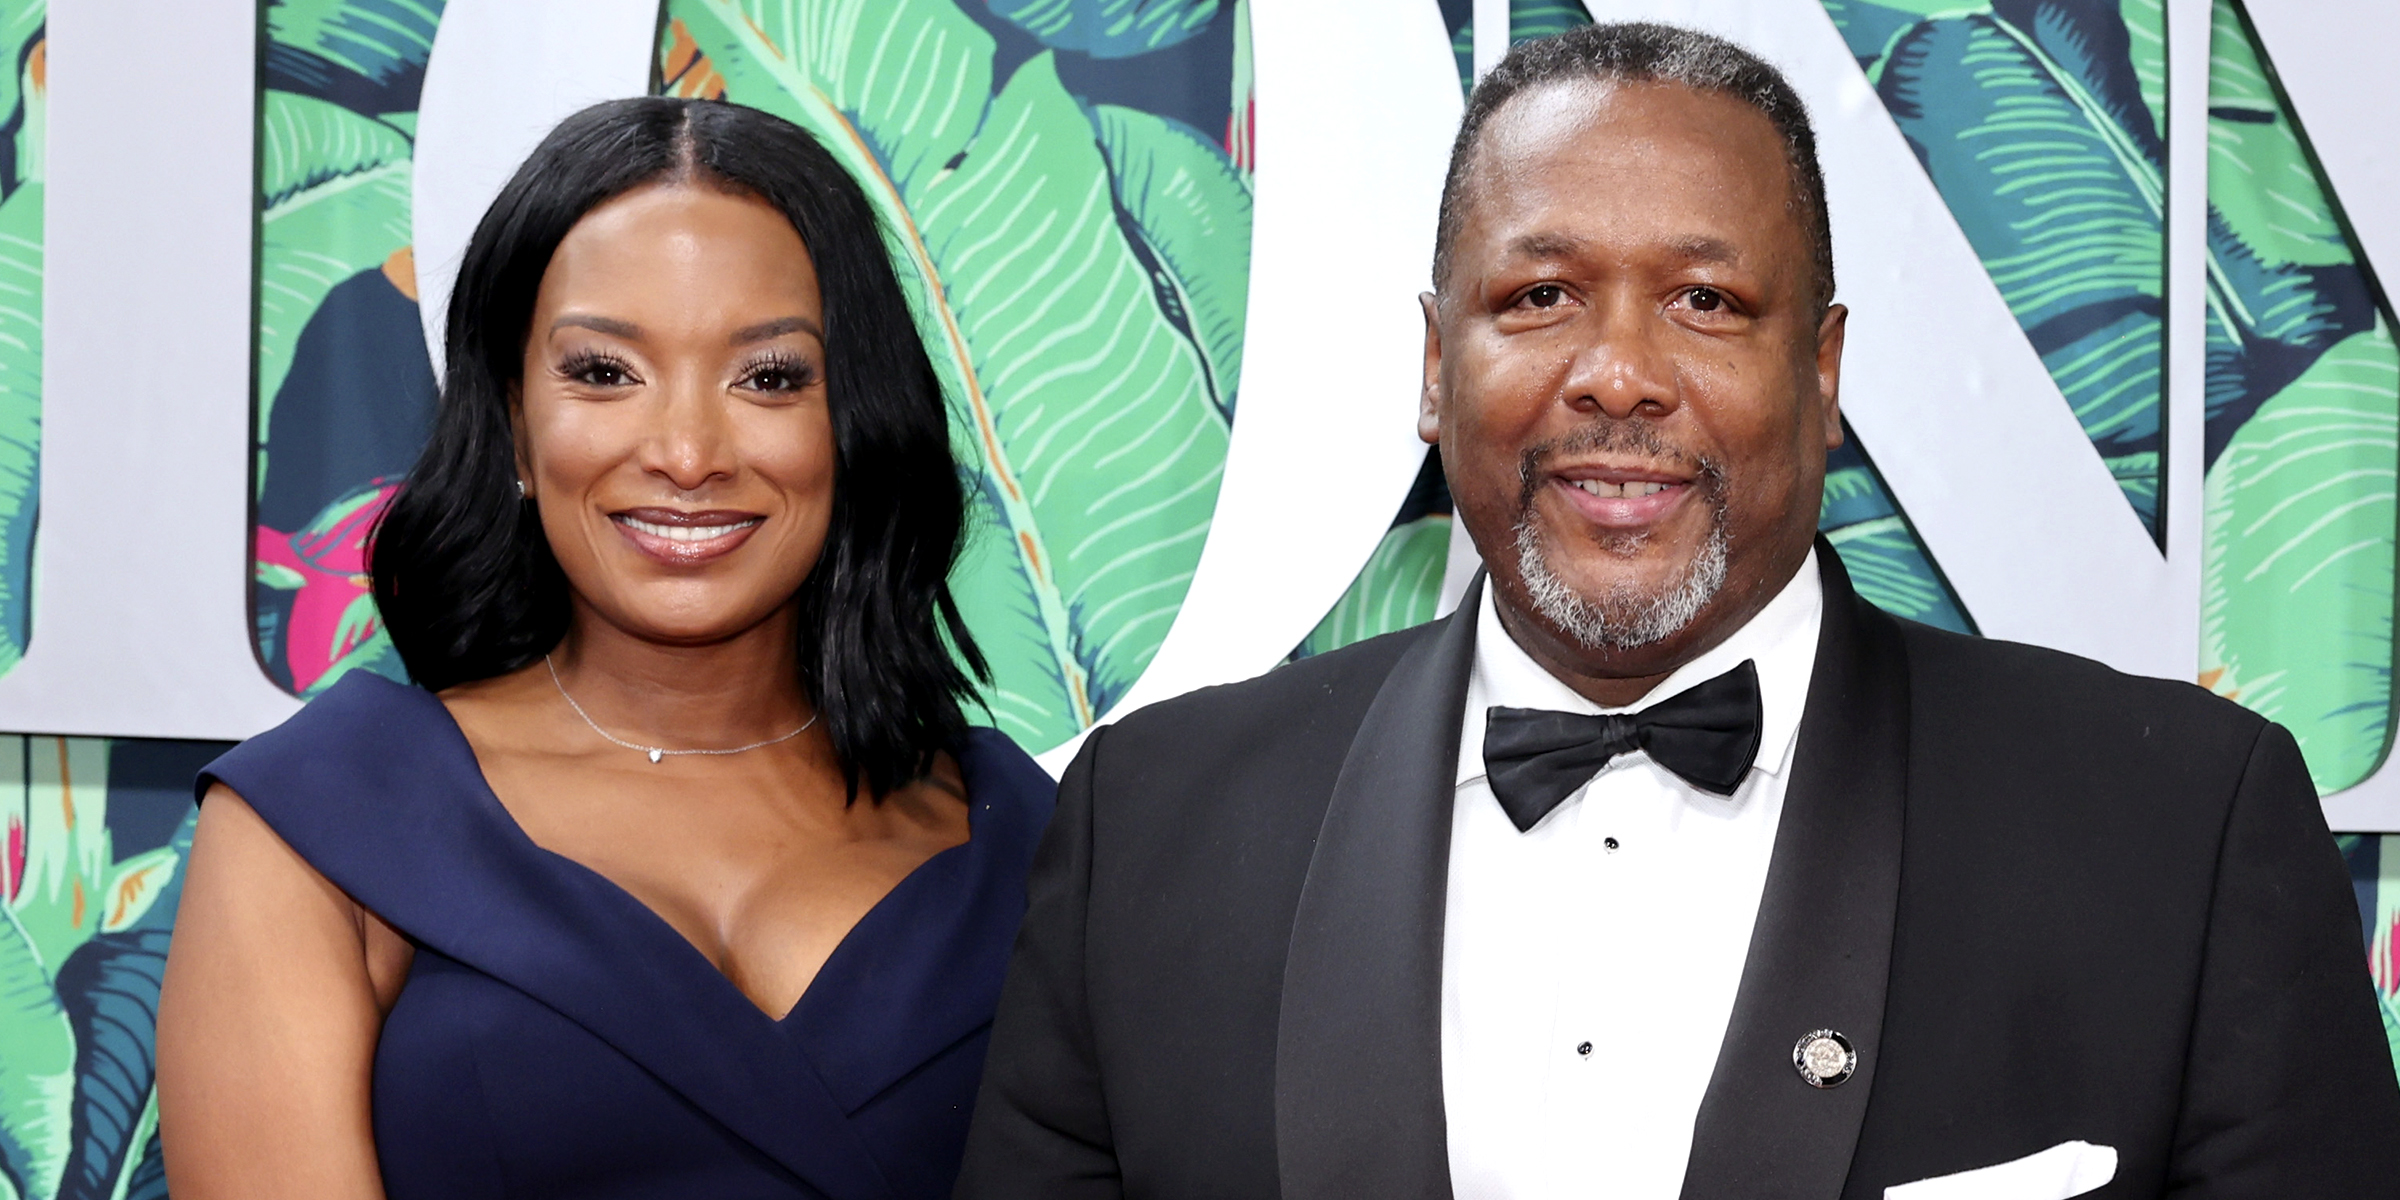 Wendell Pierce and Erika Woods. | Source: Getty Images